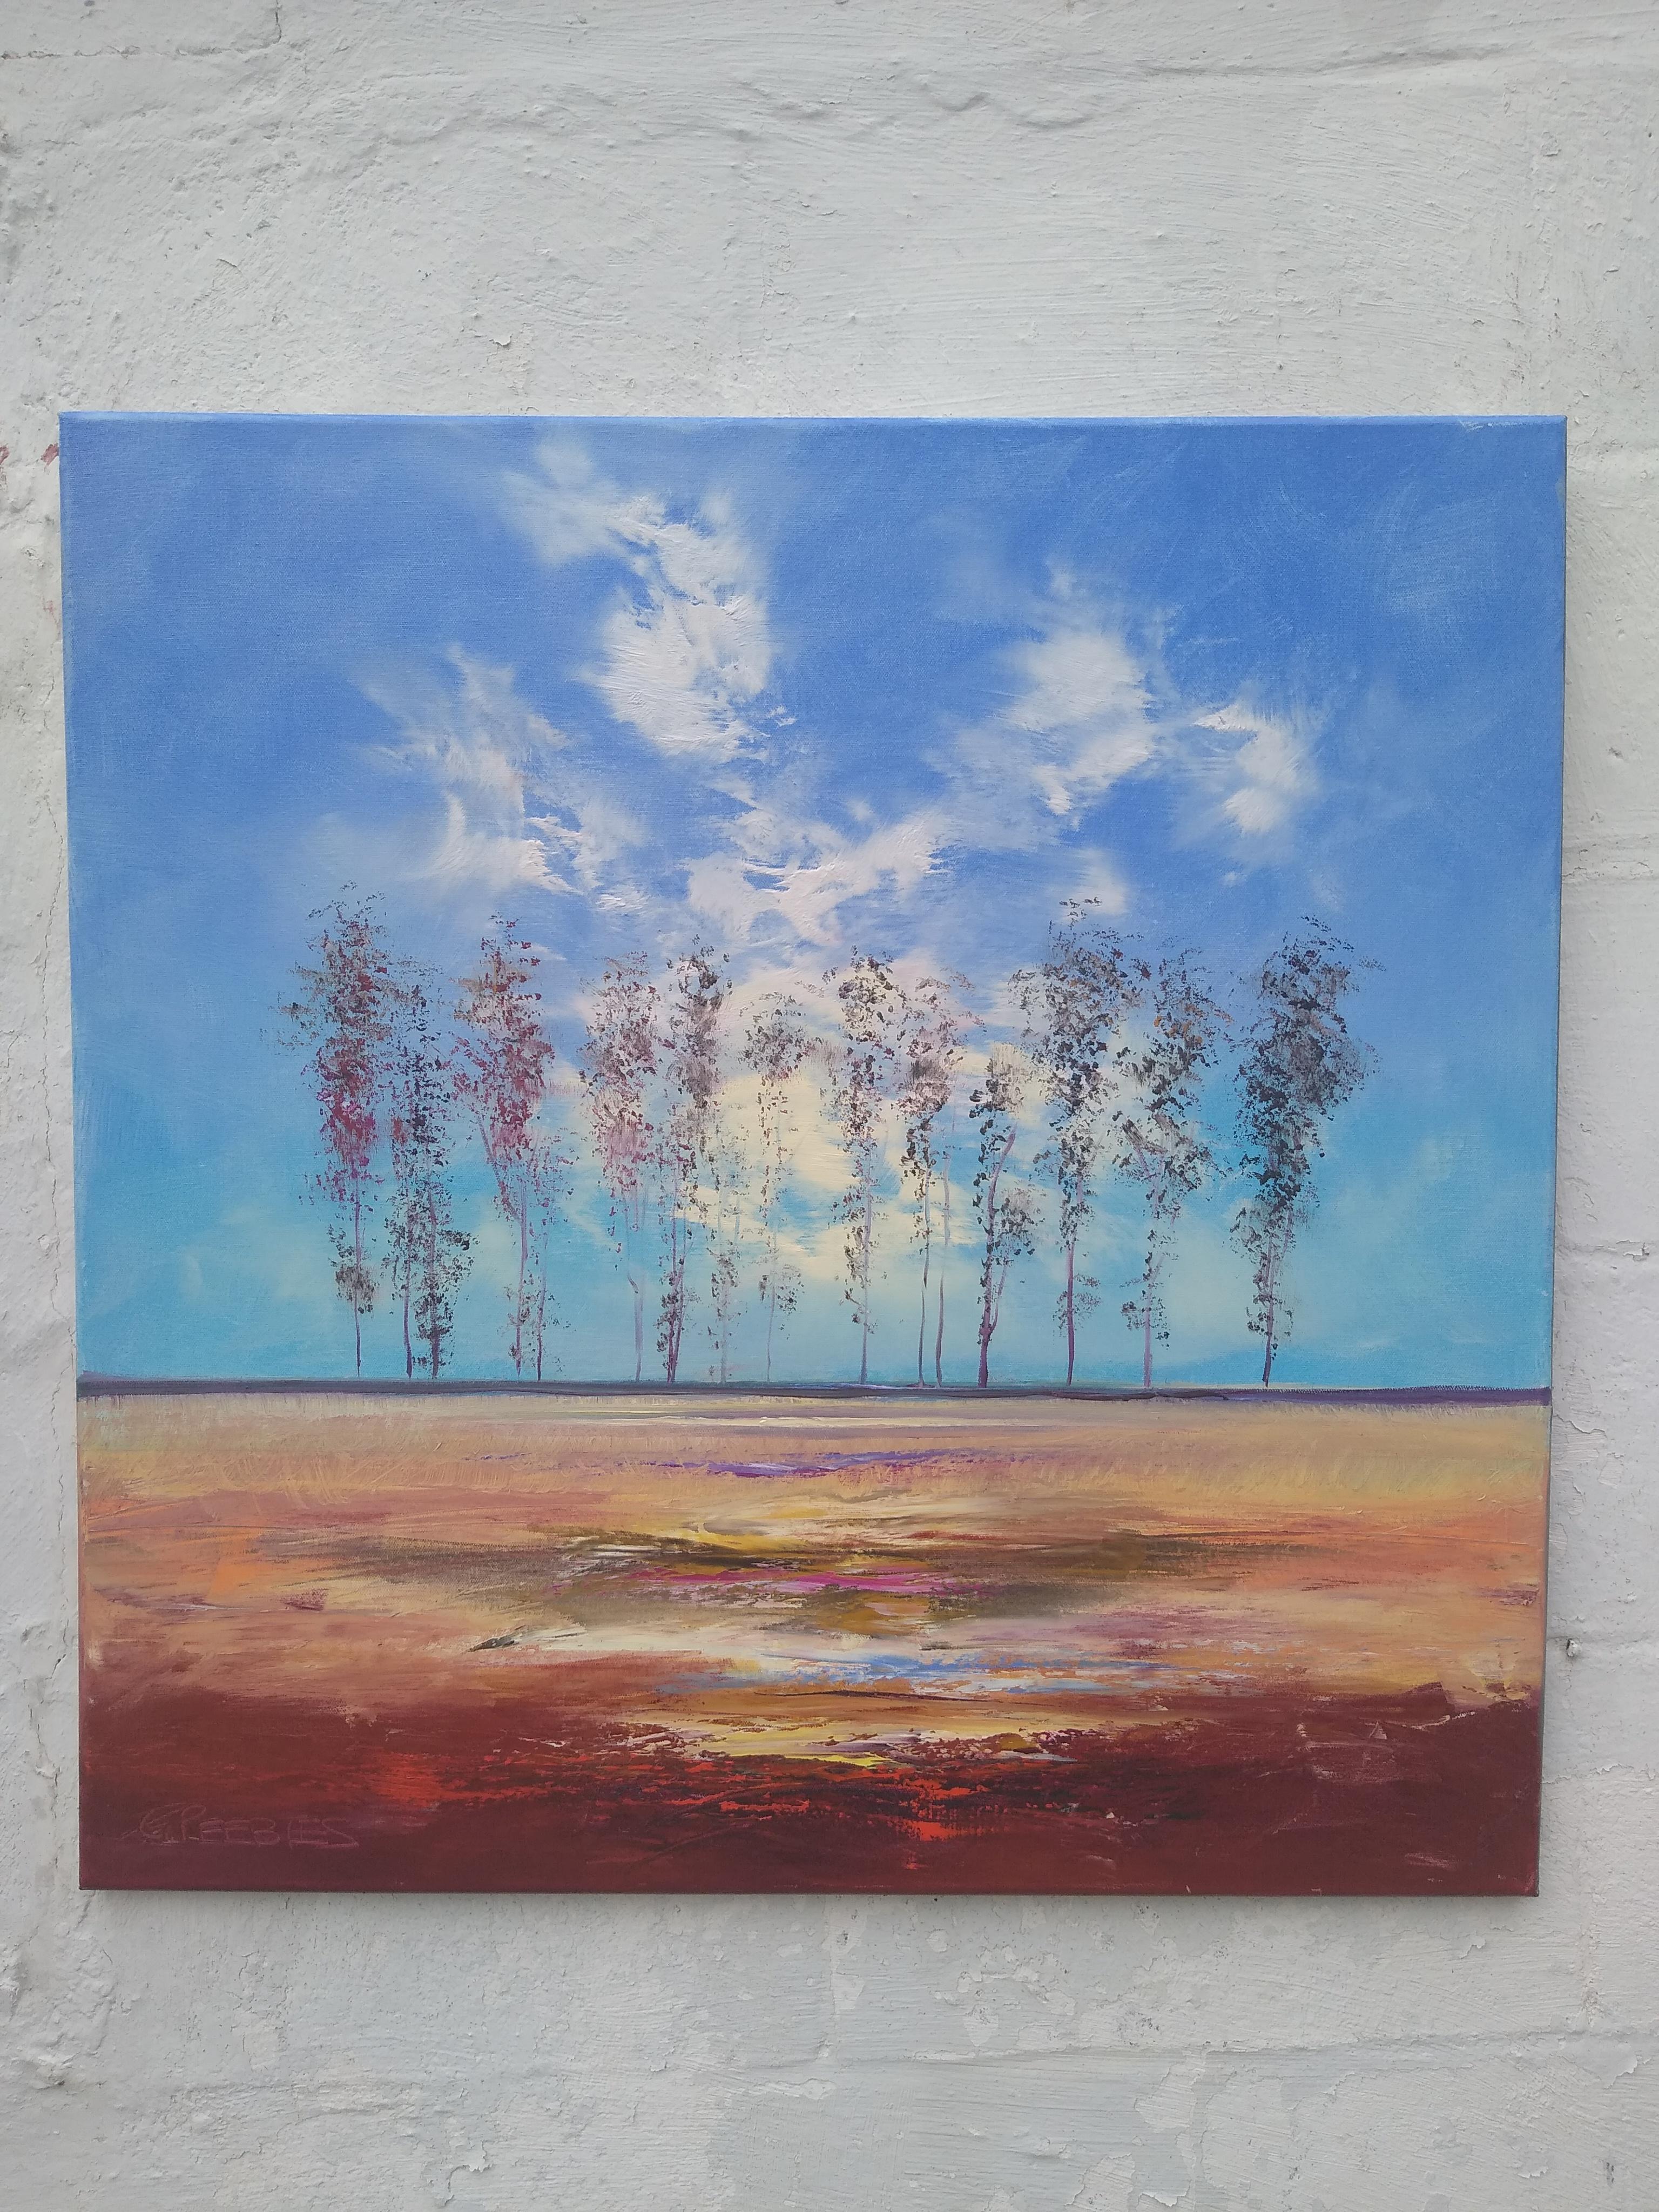 <p>Artist Comments<br>A stand of deep violet trees on the horizon in striking contrast to the bright blue sky. Using swift brushwork, artist George Peebles creates a calm and peaceful scenic view. George is known for his dramatic autumn landscapes